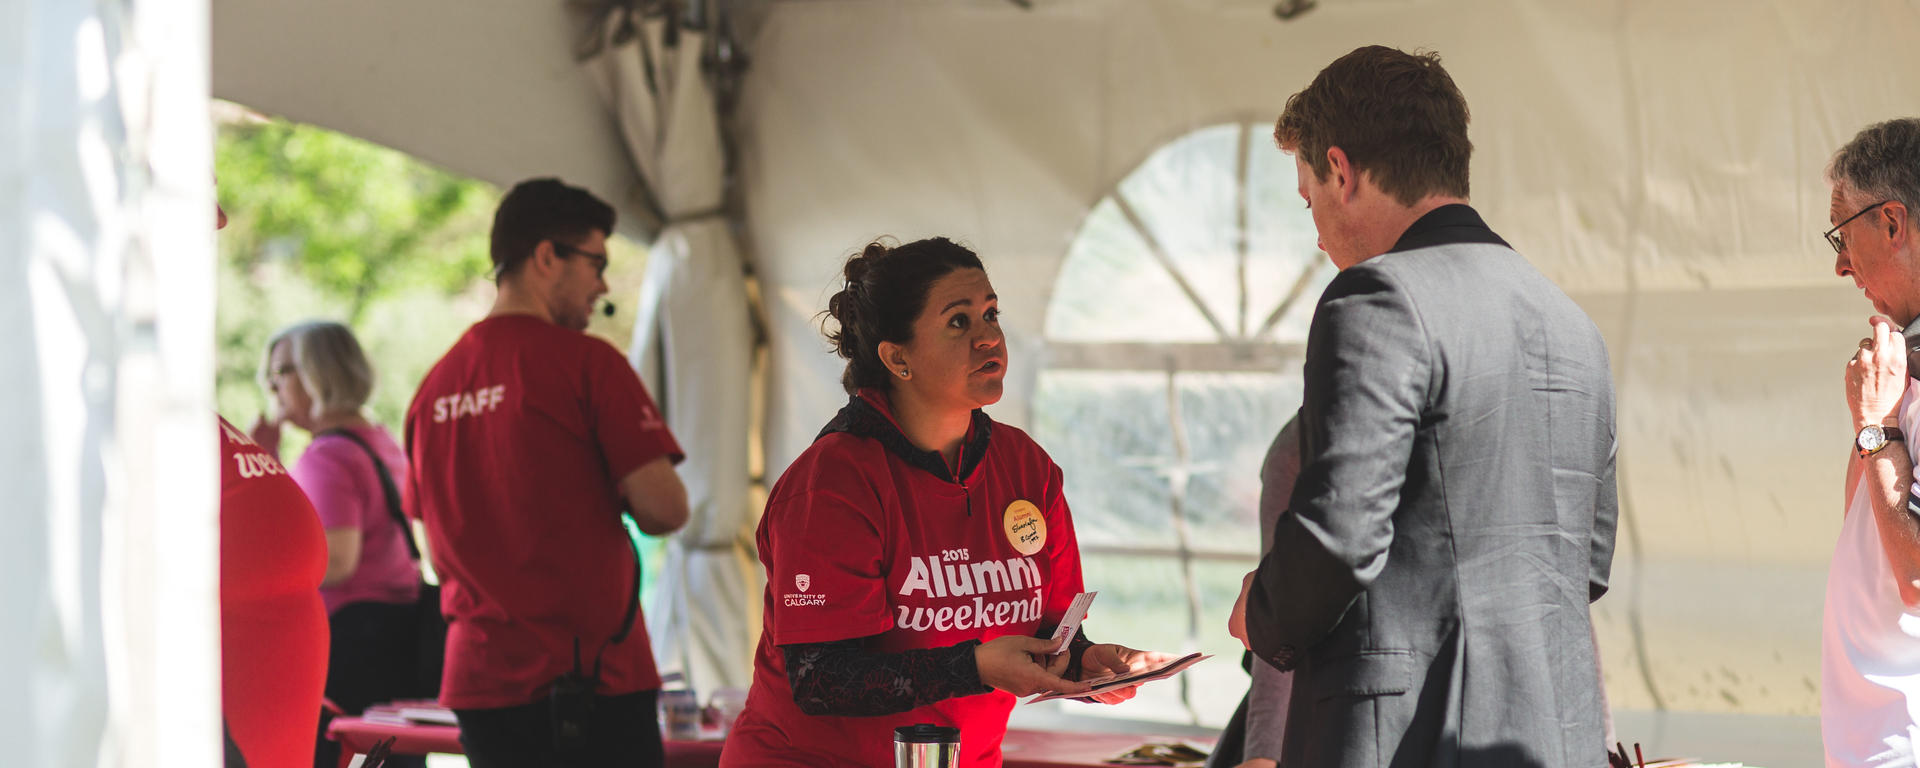 UCalgary piloted Alumni Weekend in 2015. It has been an annual event since. 